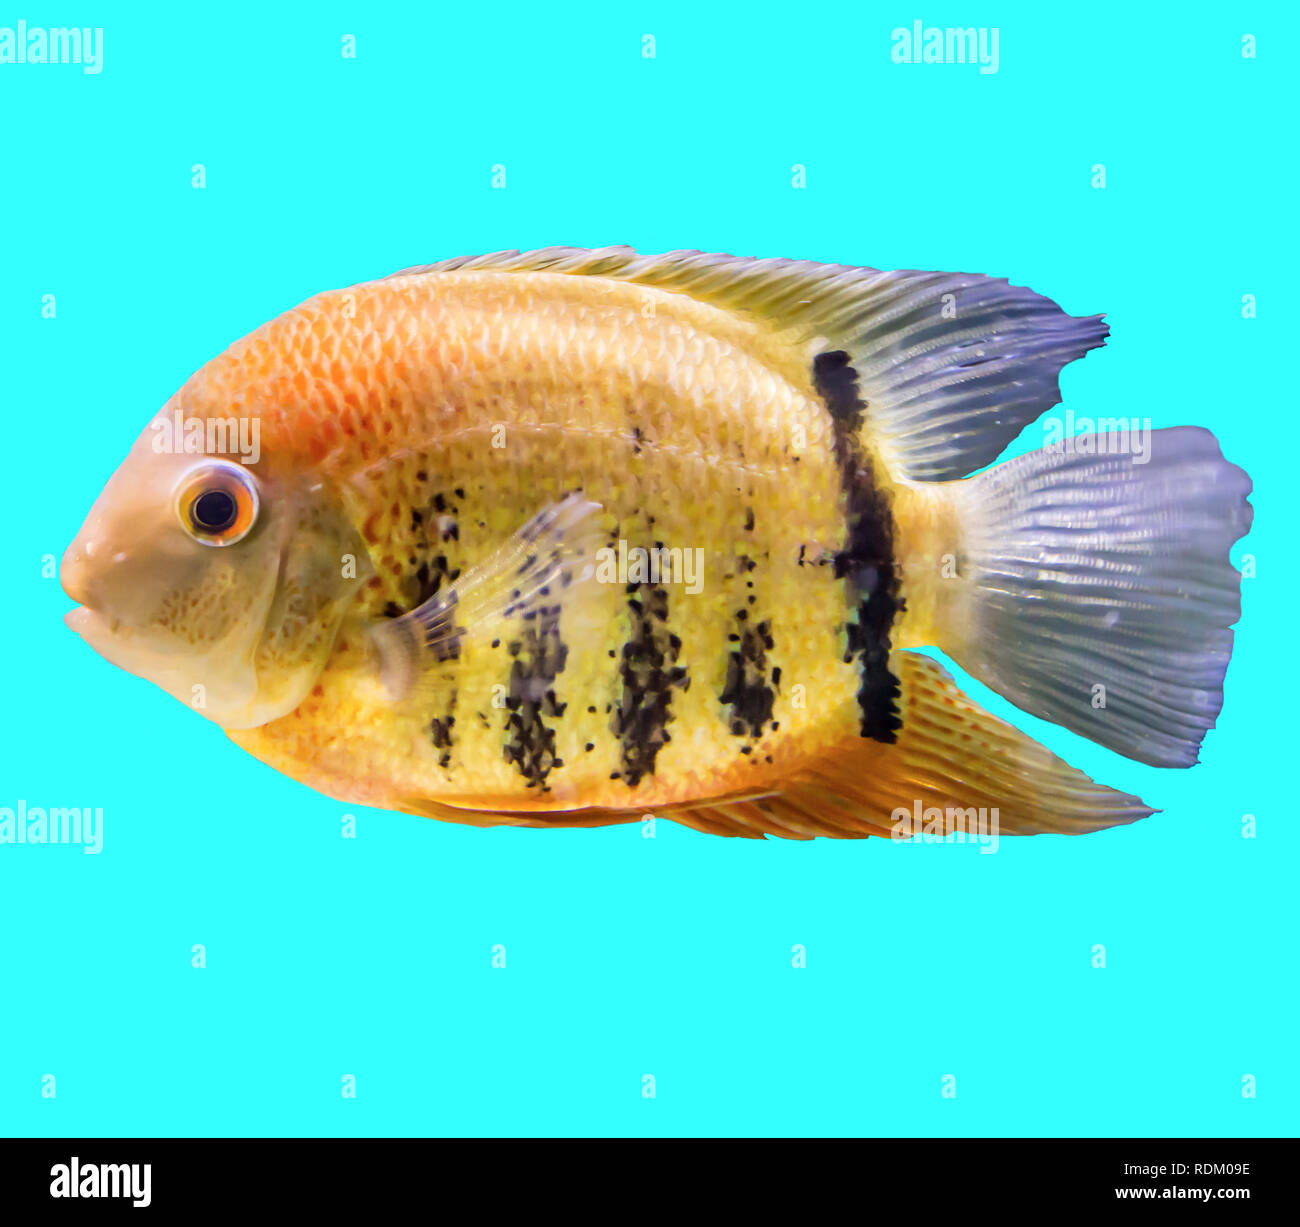 Striped fish from the Amazon and Orinoco. Heros efasciatus. Isolated photo on blue  background. Website about nature and aquarium fish. Stock Photo